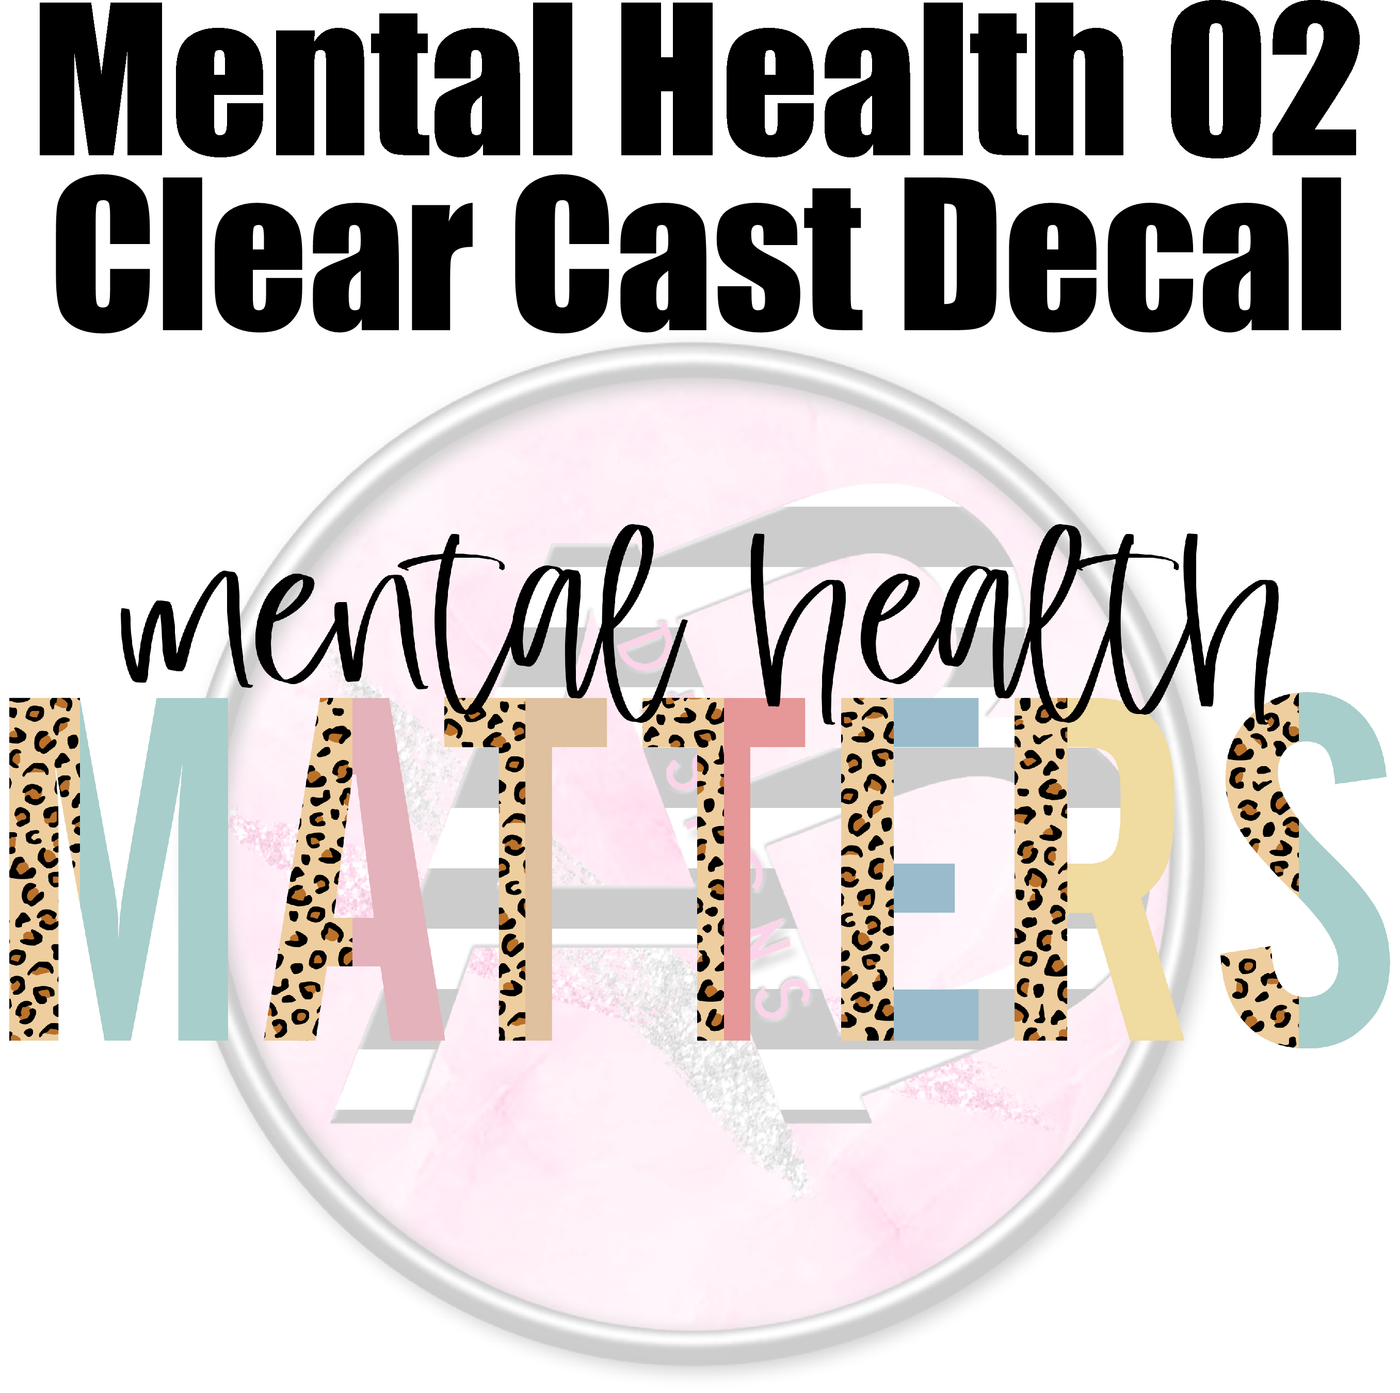 Mental Health 03 - Clear Cast Decal